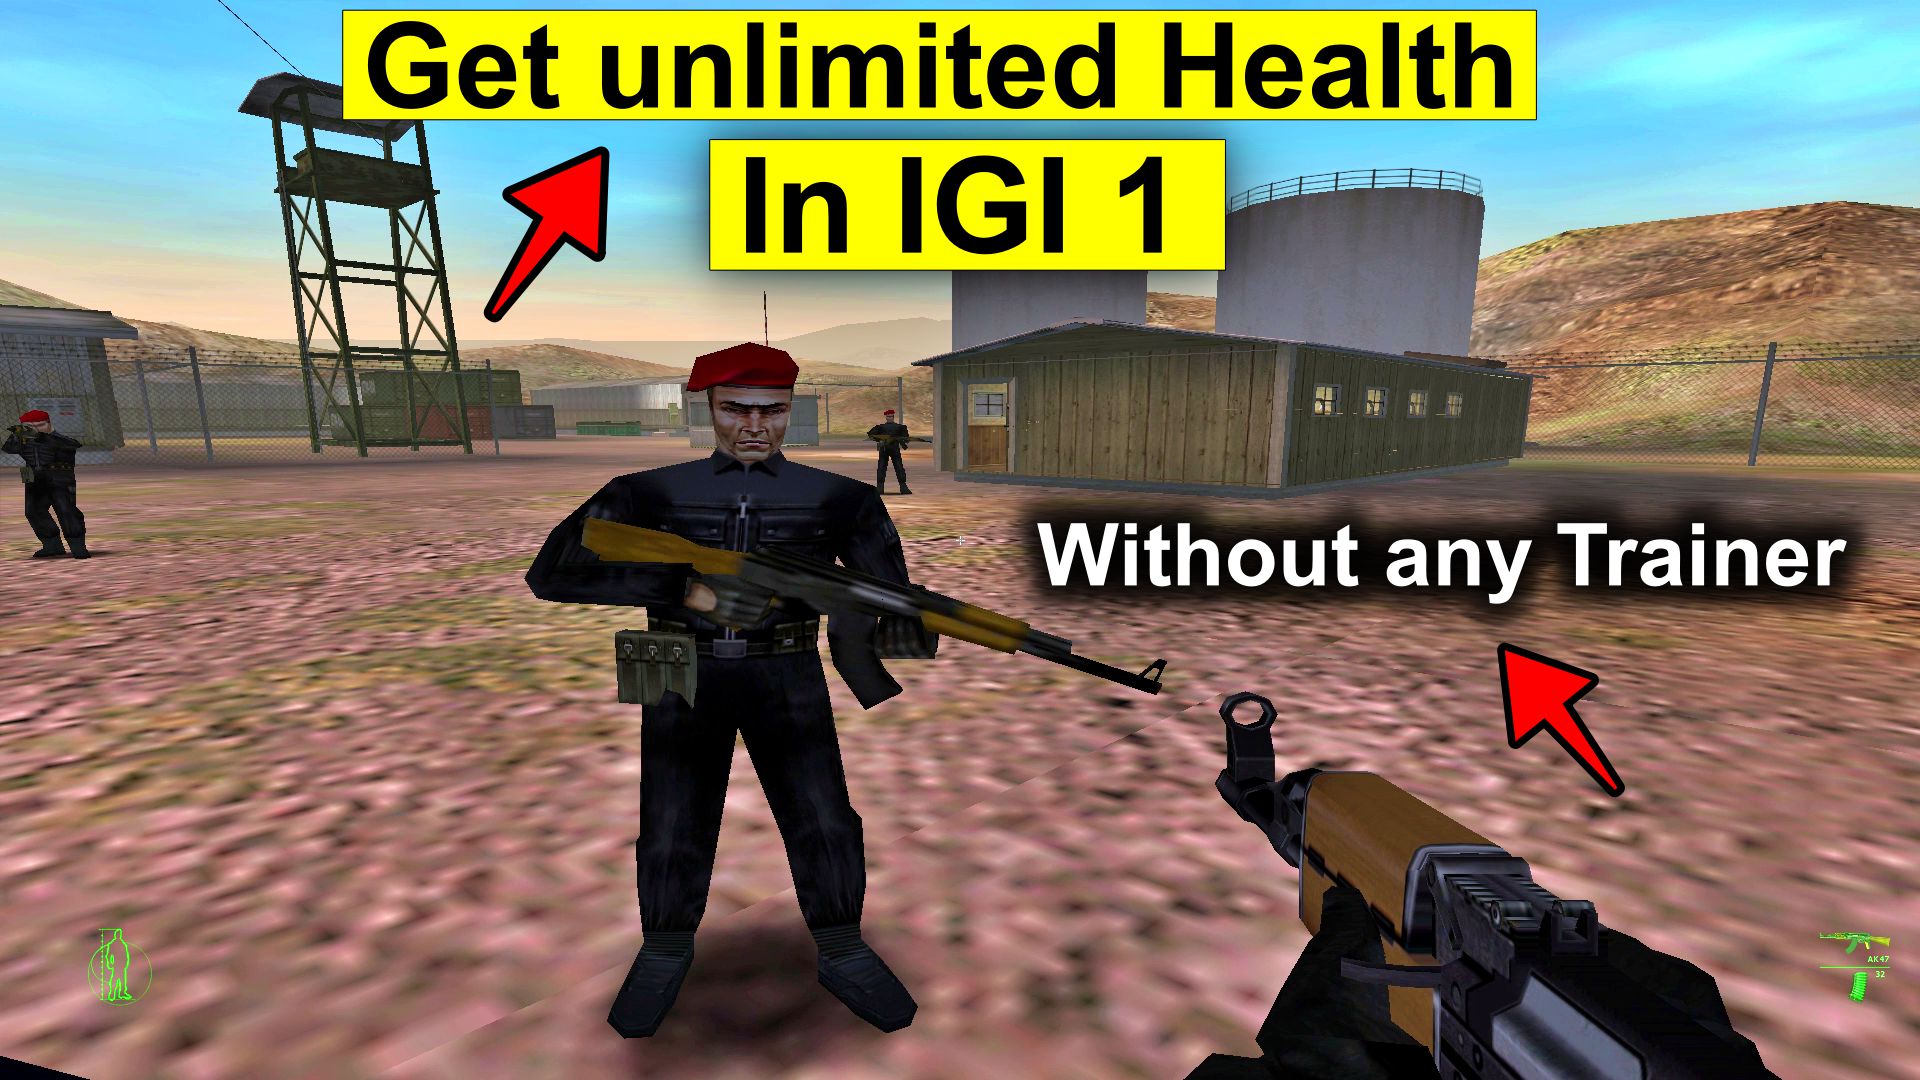 Get unlimited health in igi 1 without using trainer